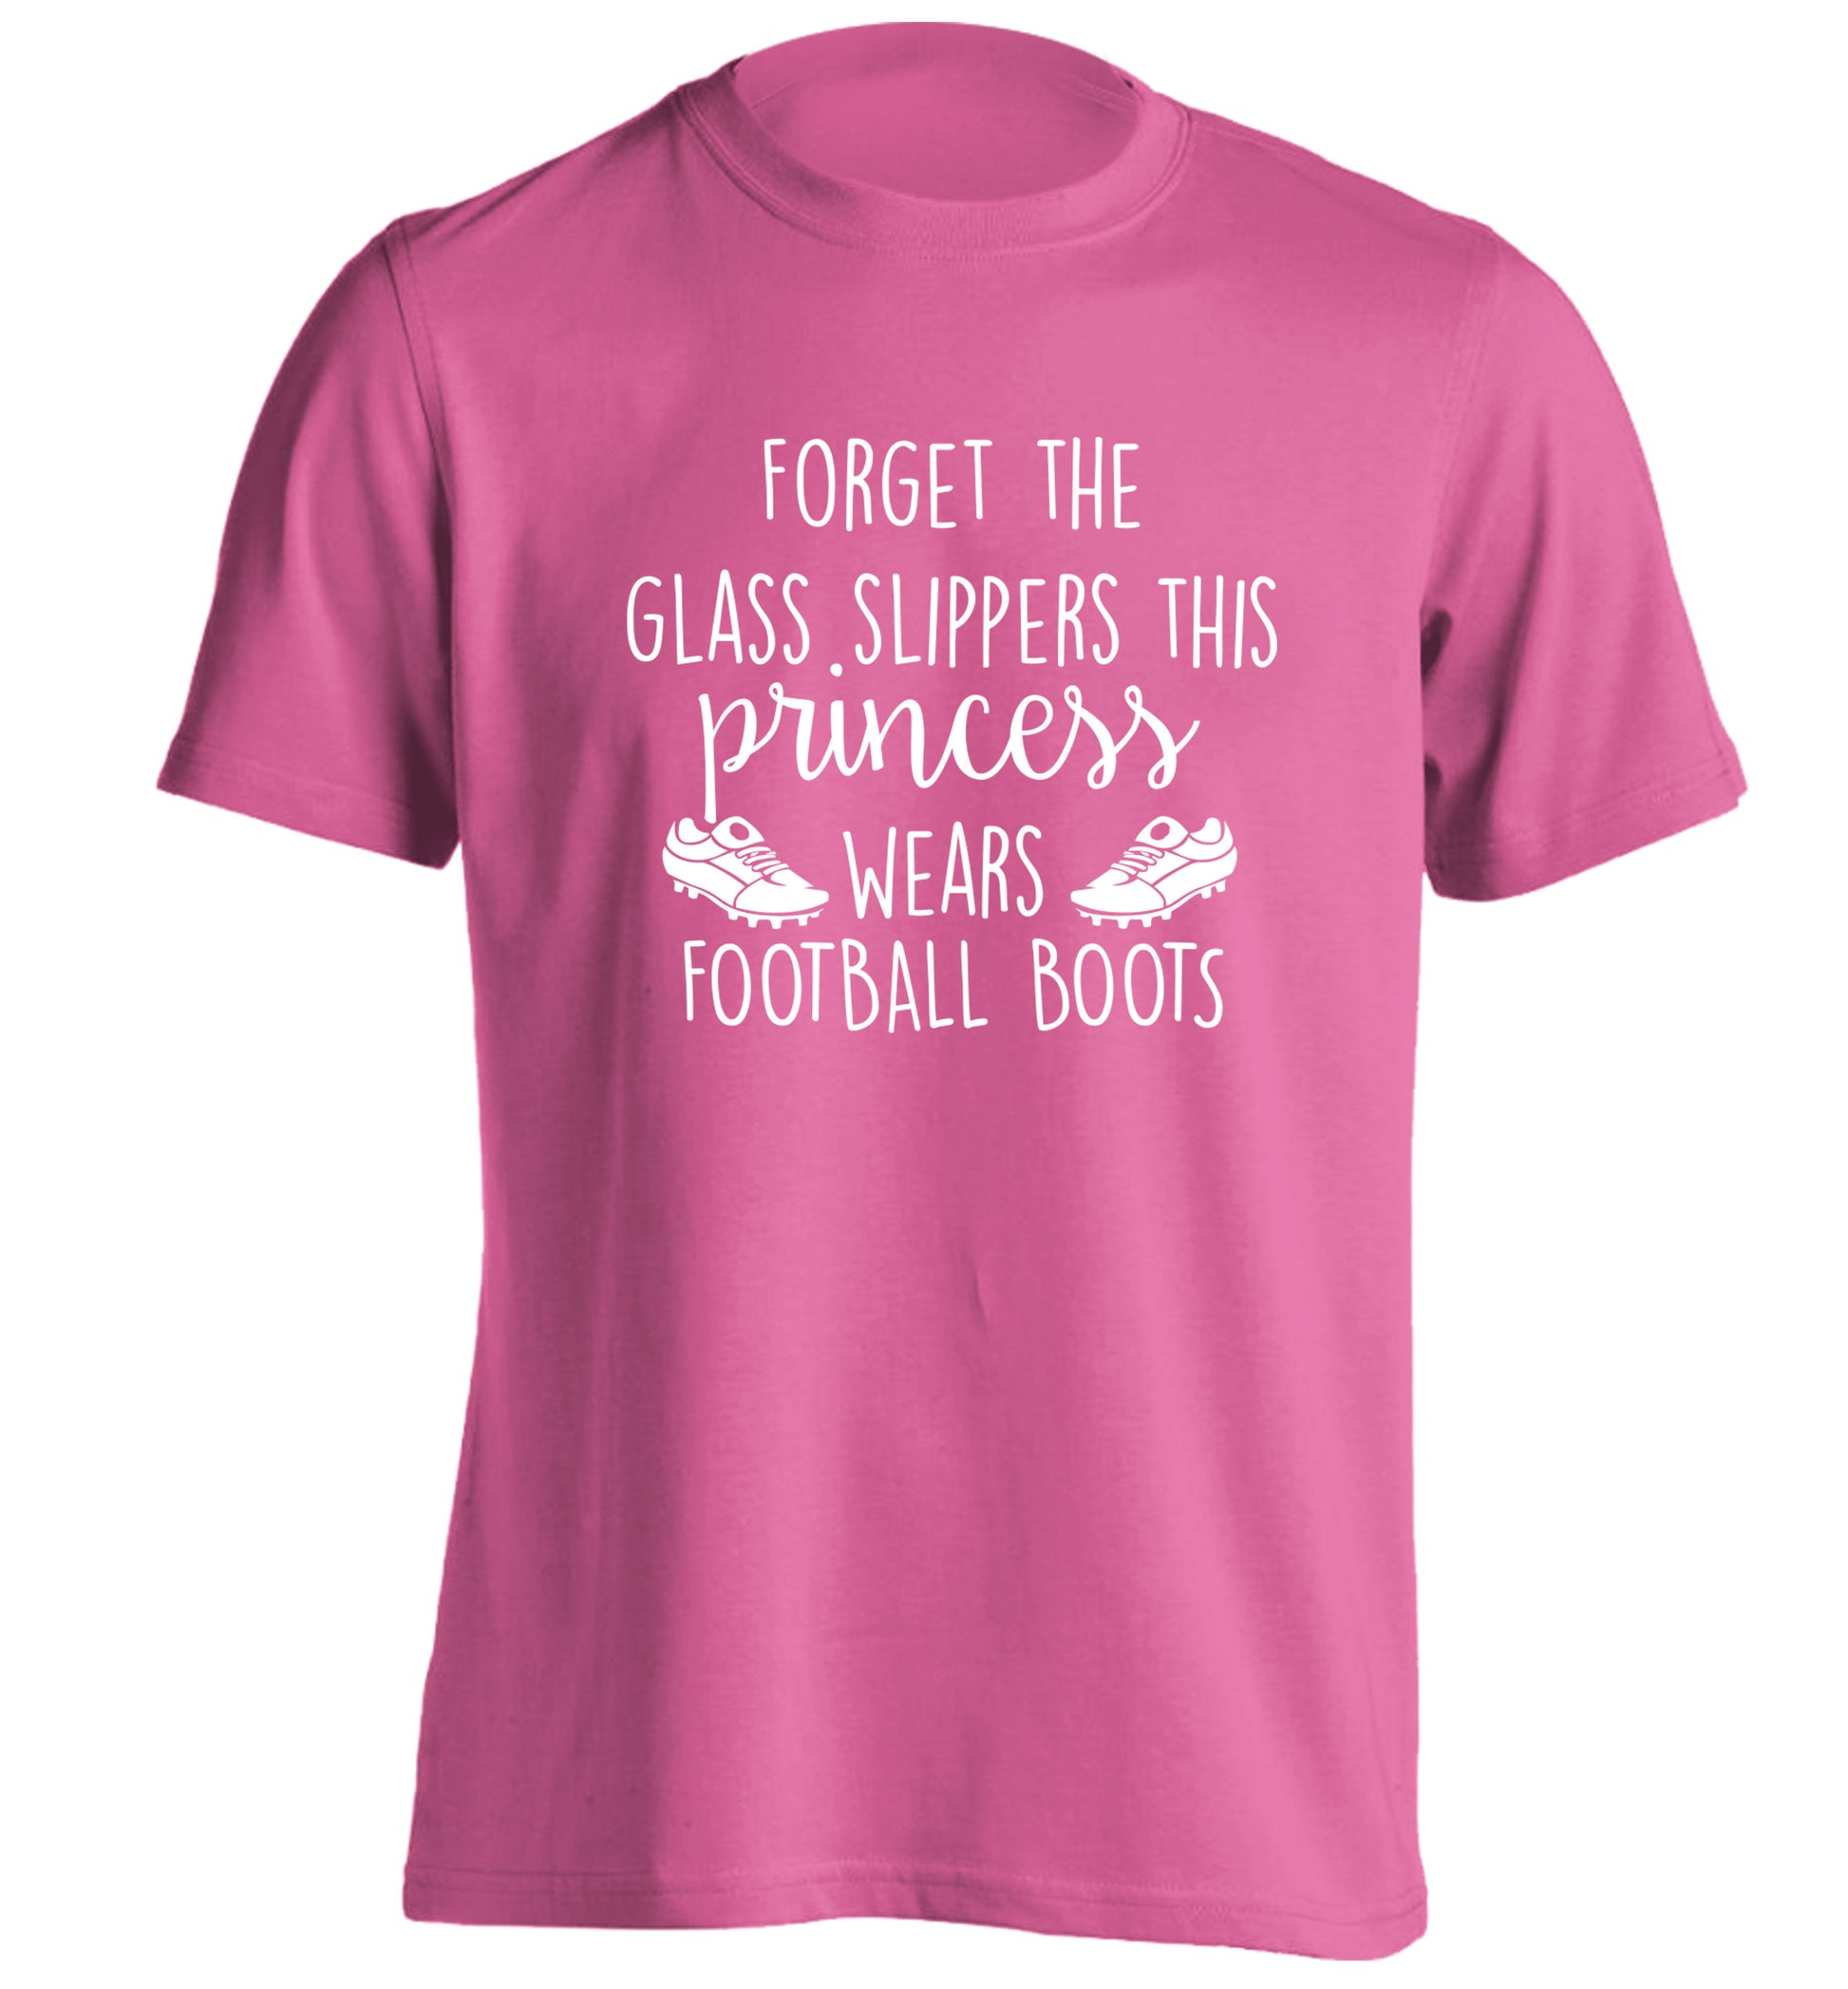 Forget the glass slippers this princess wears football boots adults unisex pink Tshirt 2XL